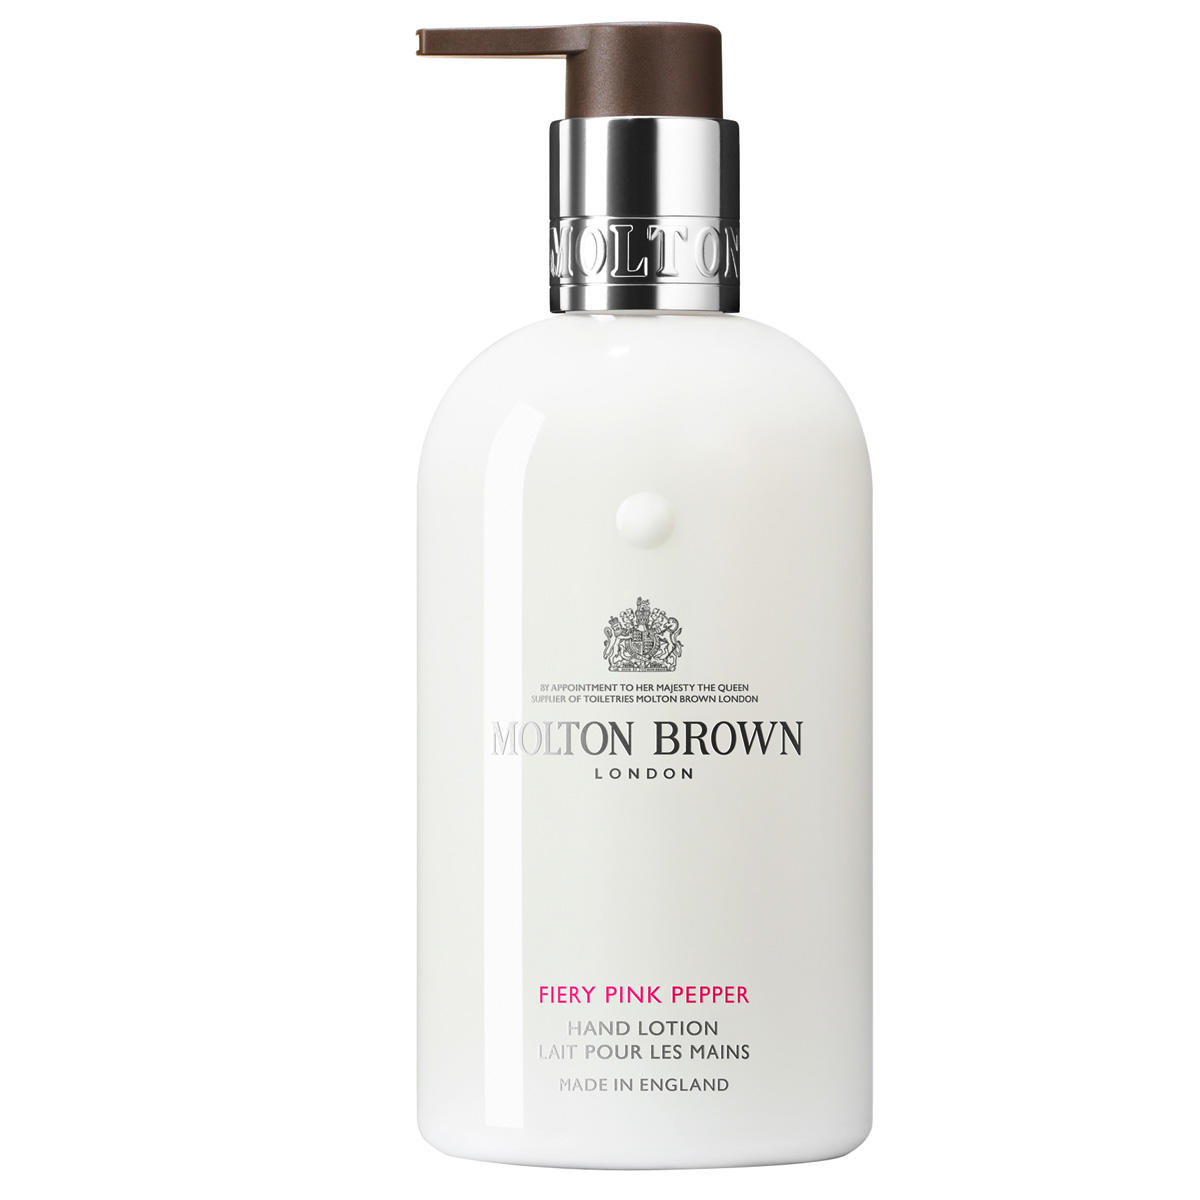 MOLTON BROWN Fiery Pink Pepper Hand Lotion 300 ml - 1